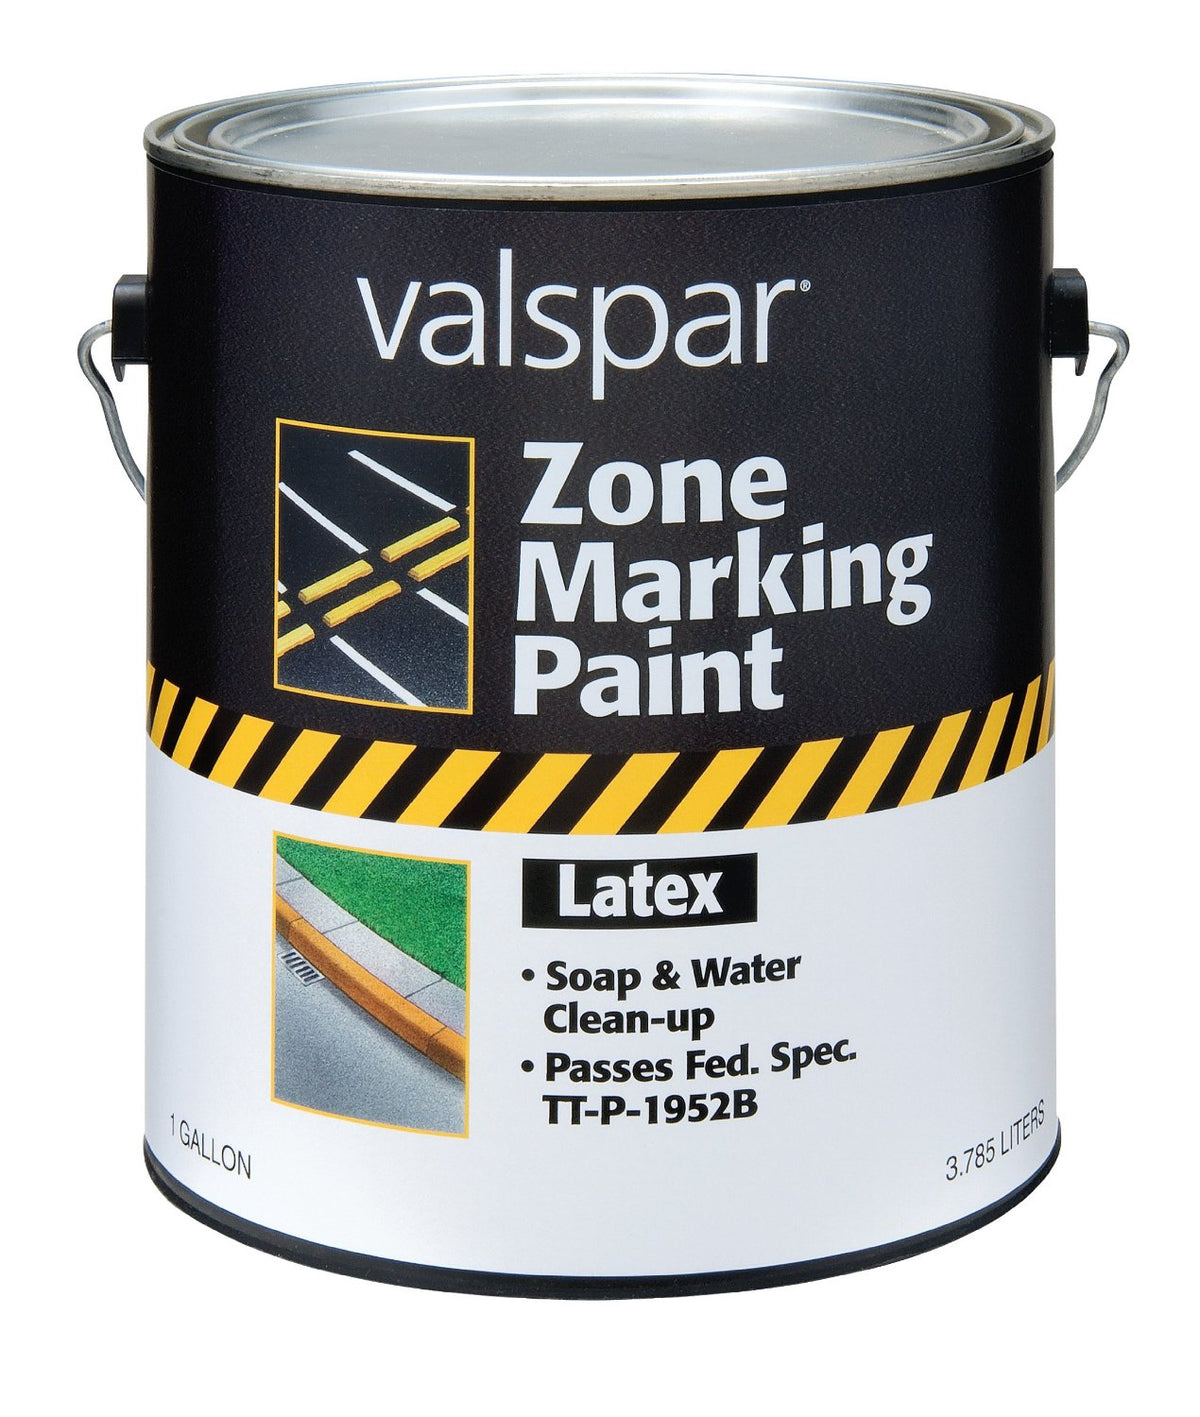 Buy valspar zone marking paint sds - Online store for paint, marking paint in USA, on sale, low price, discount deals, coupon code